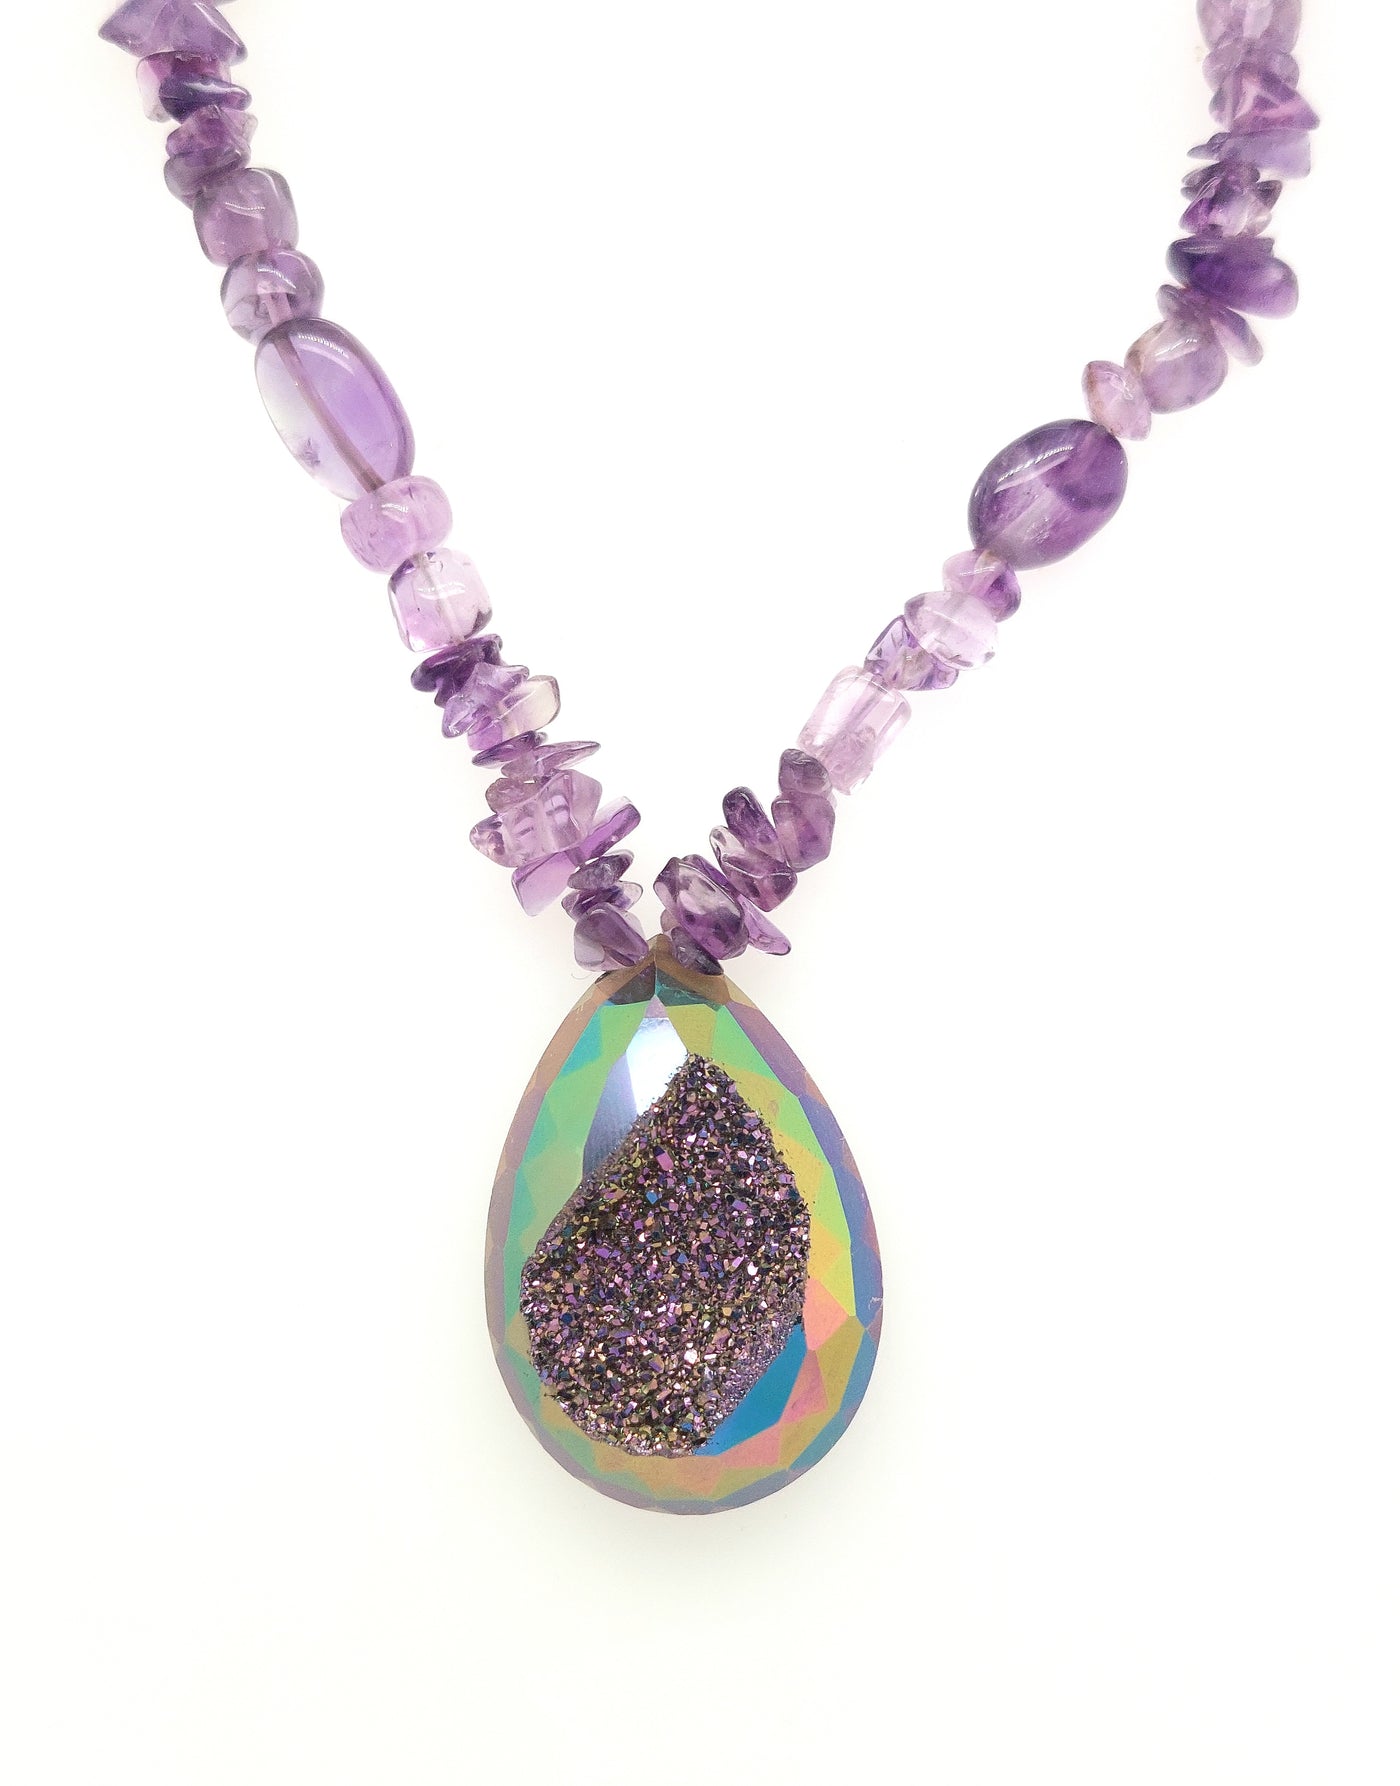 Amethyst Lovers Delight! Amethyst Necklace with Pear Shape Druzy pendant